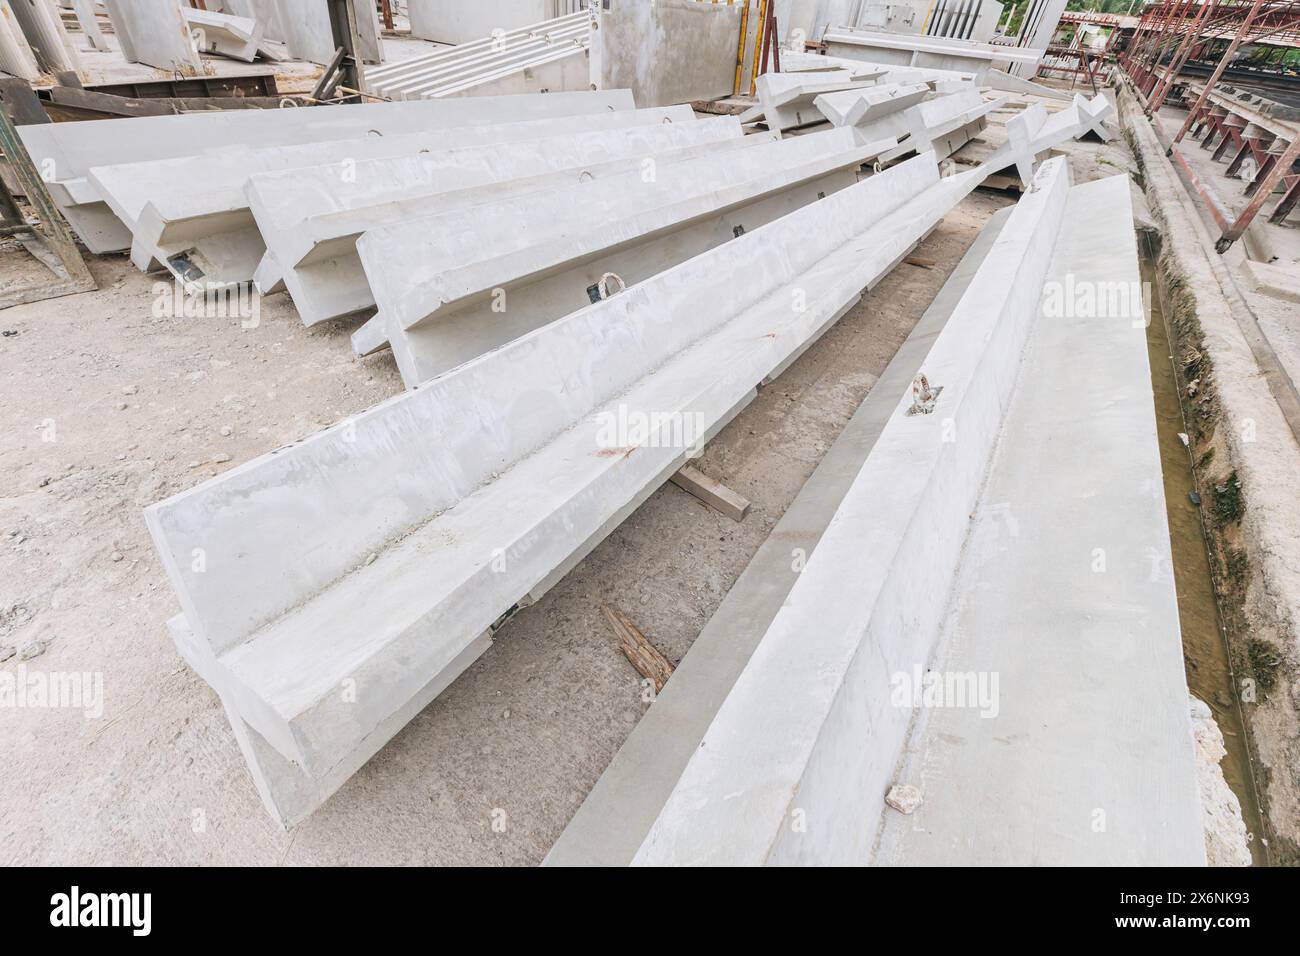 Precast concrete casting manufacturing plant, Cement products large construction site yard business industry. Stock Photo